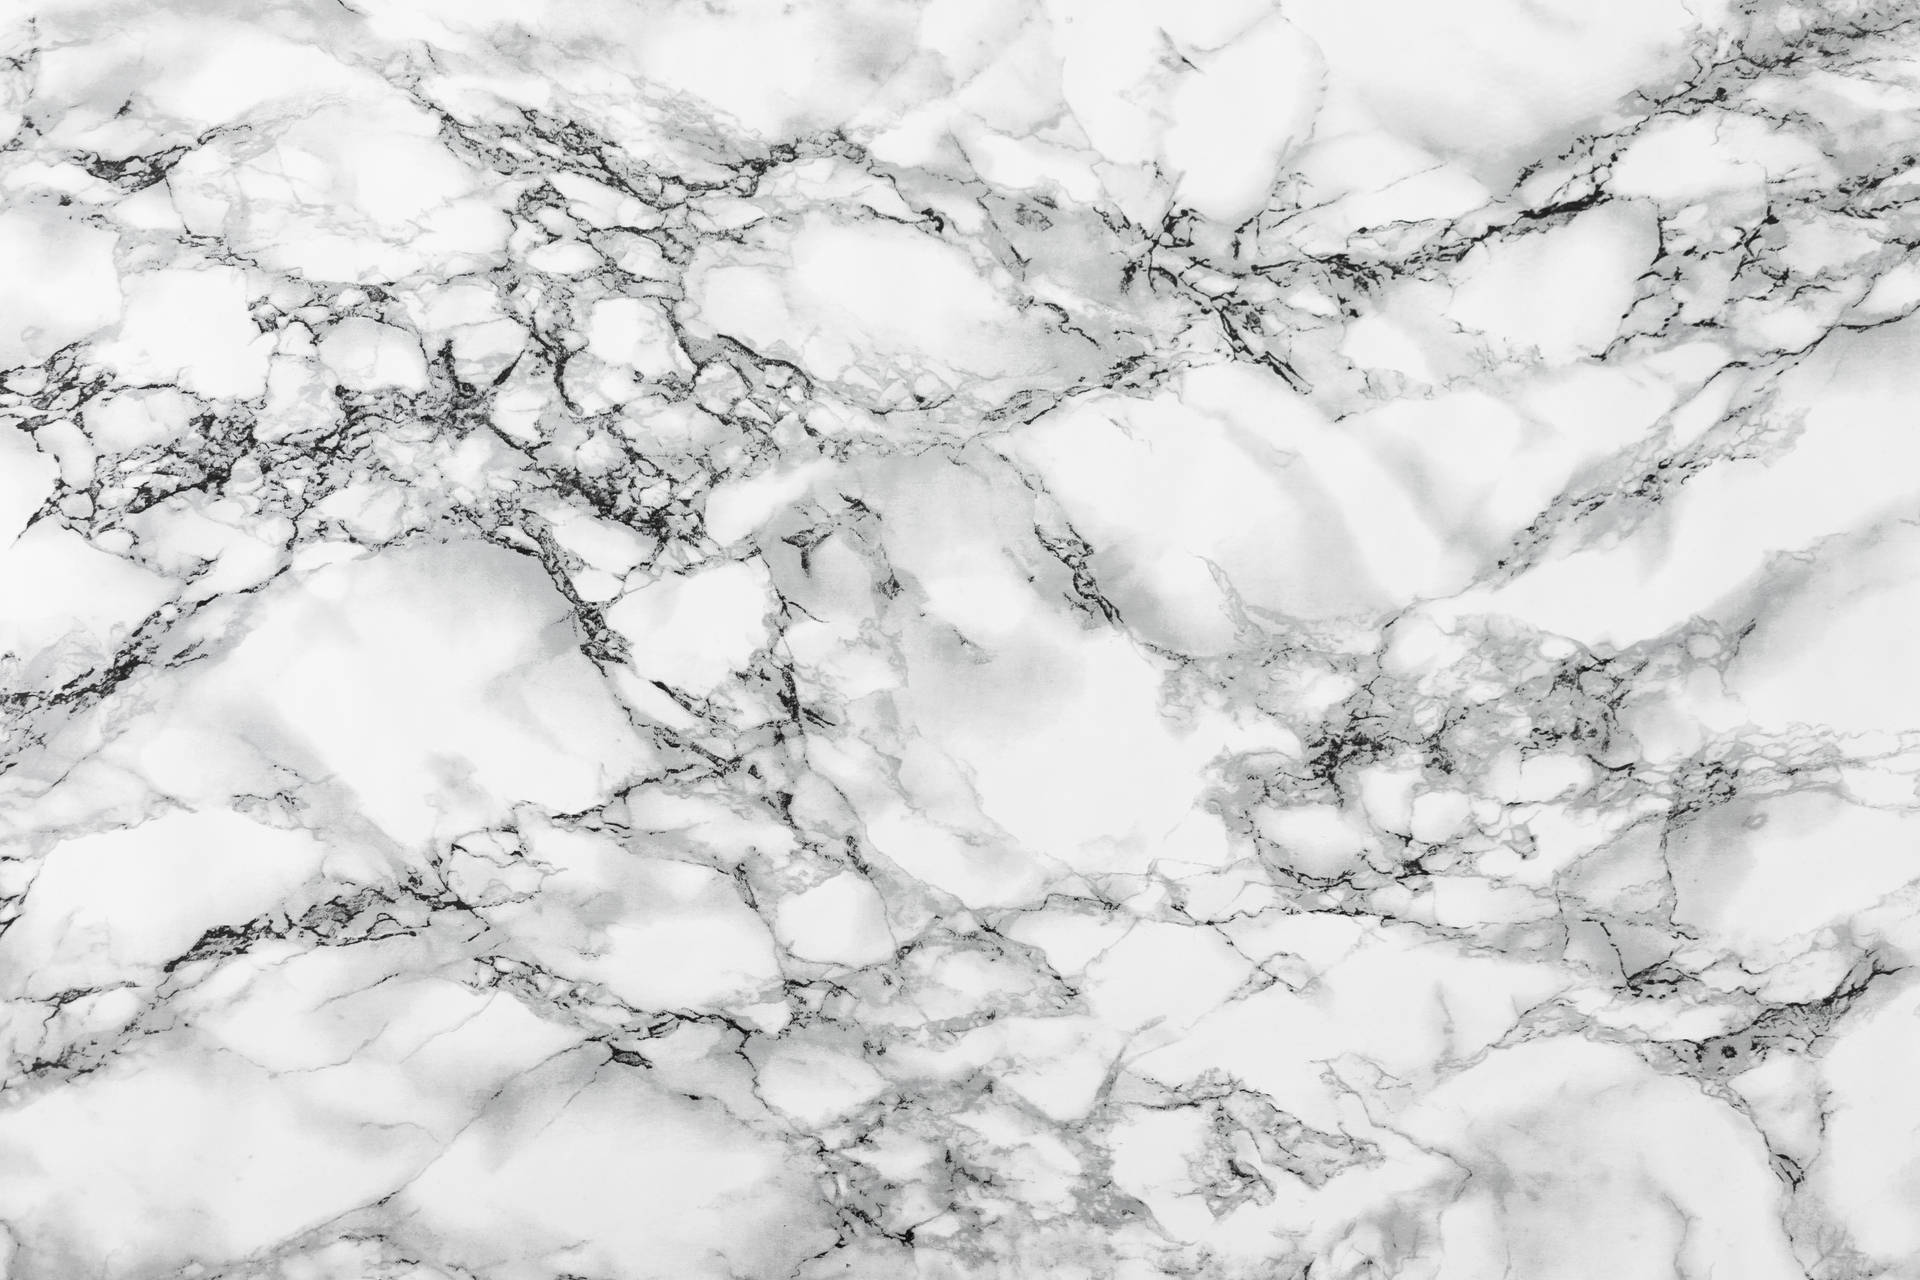 Clean-looking White Aesthetic Marble